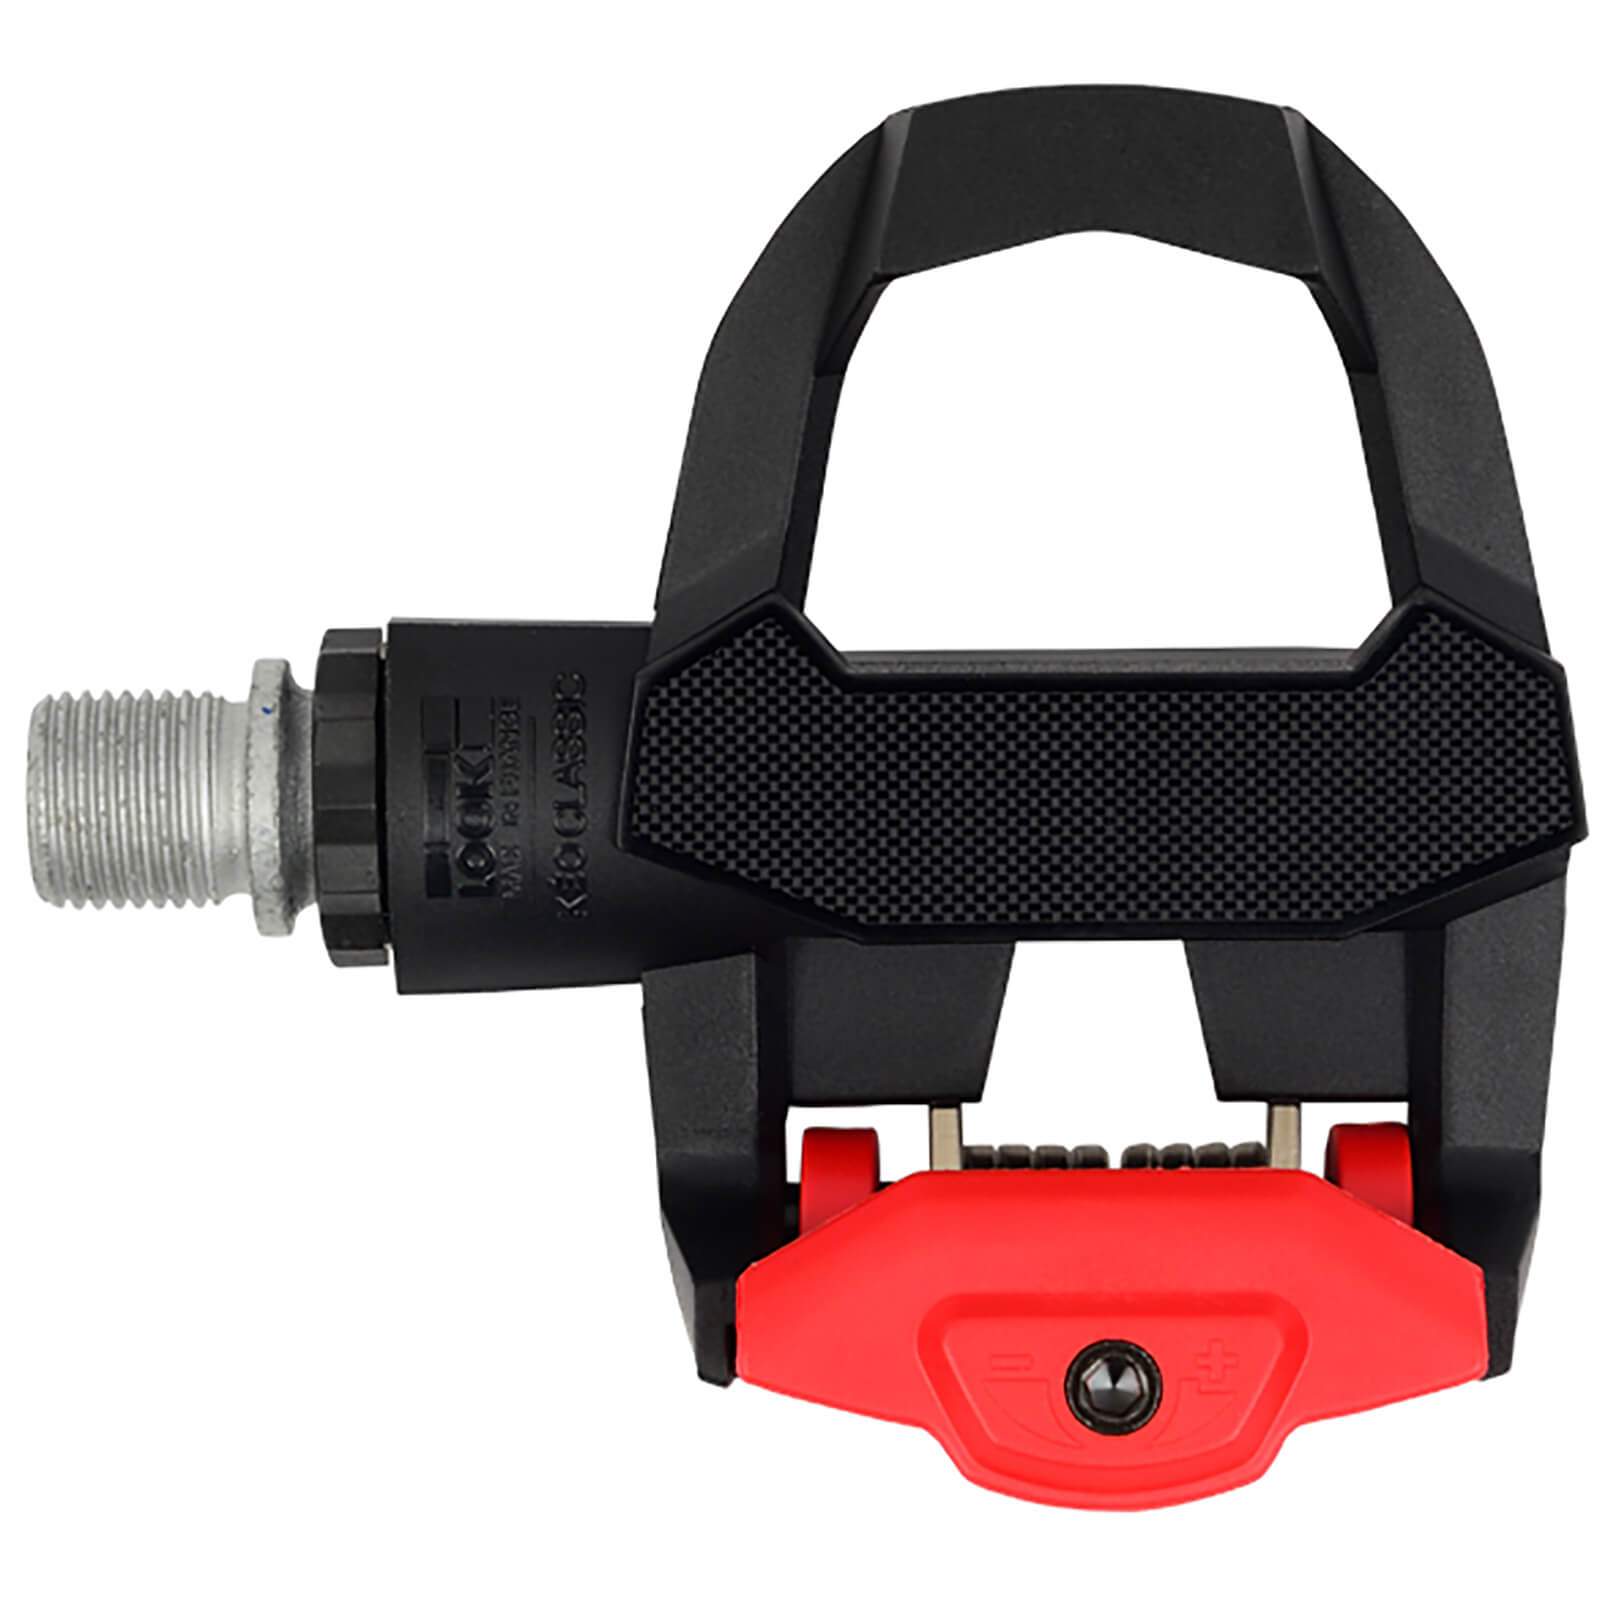 Look Keo Classic 3 Pedals - Black/Red